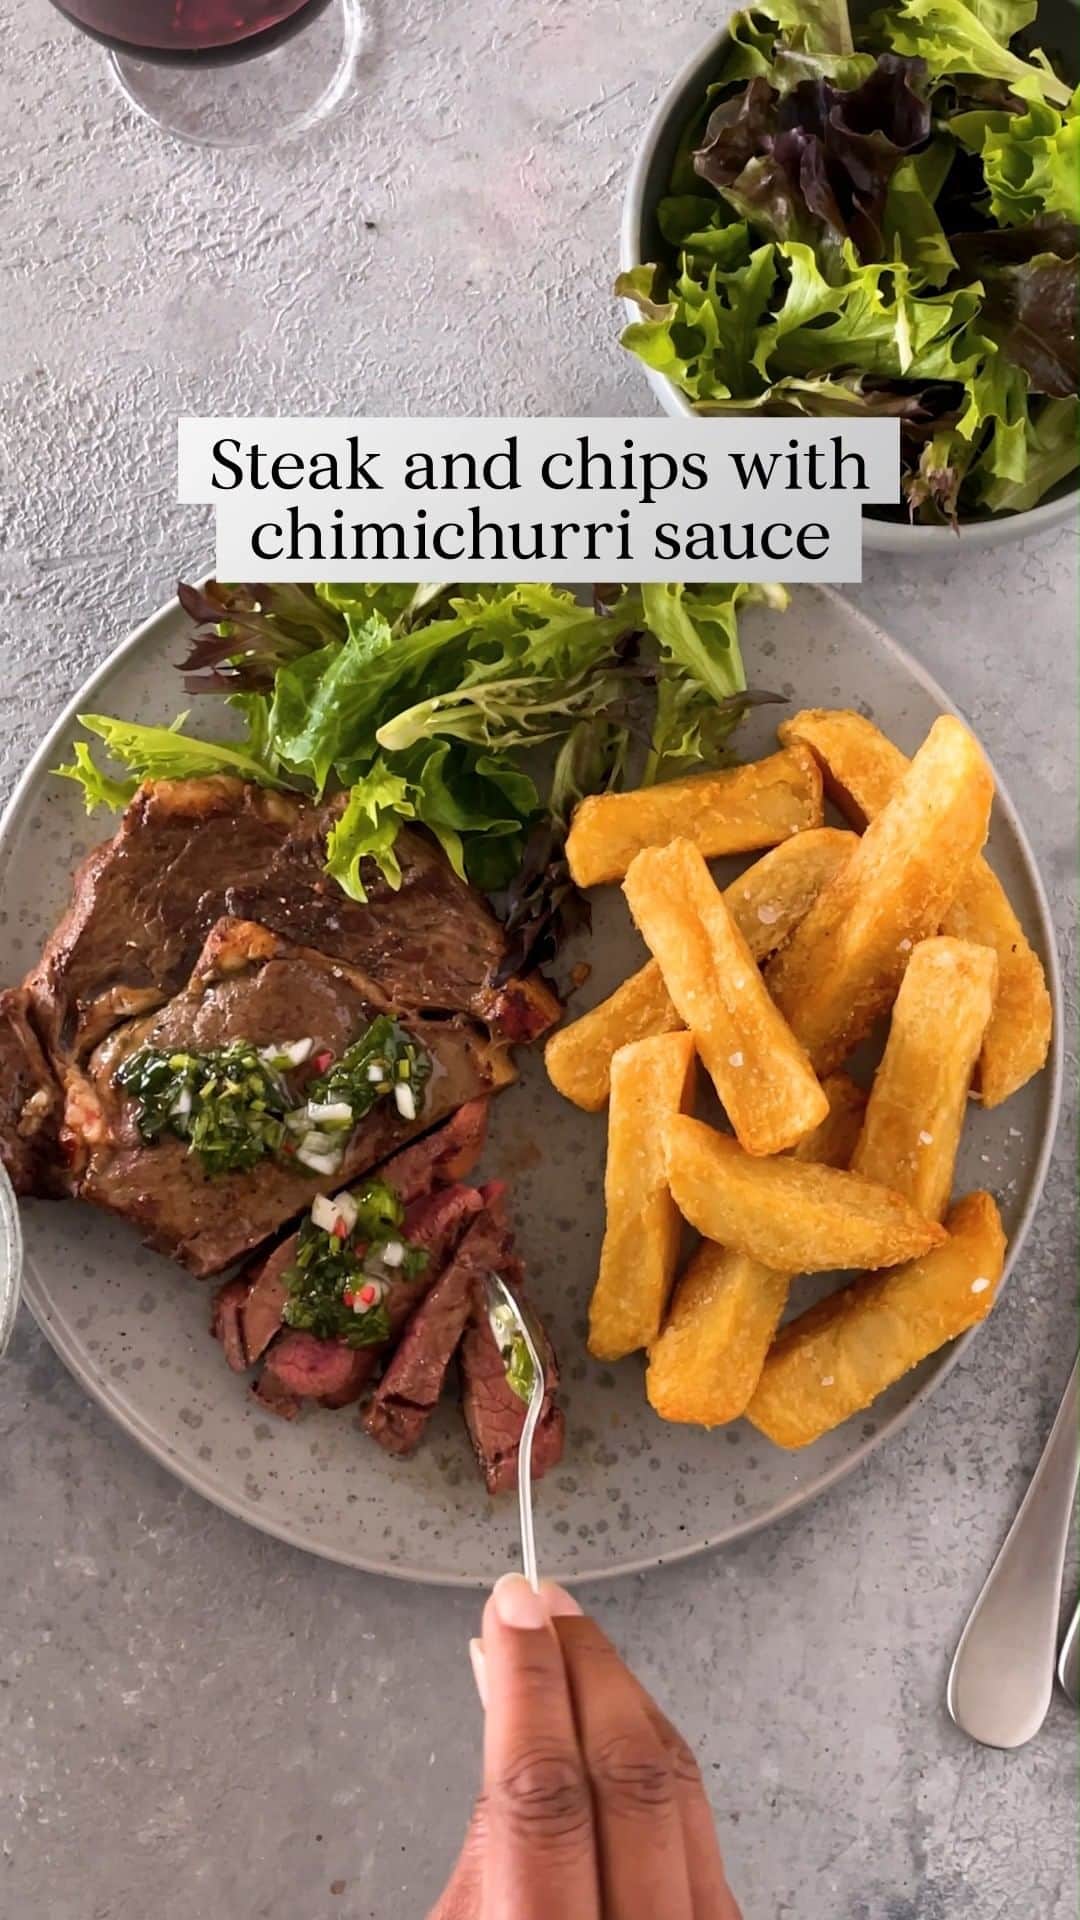 Tesco Food Officialのインスタグラム：「Only the finest cuts are salt-dry aged and matured to create our Tesco Finest Aberdeen Angus Ribeye Steak.  Pair it with this deliciously tangy chimichurri sauce recipe and our Tesco Finest Triple Cooked Chips for the perfect kick to freshen up steak night. Head to the link in bio to explore the range.」